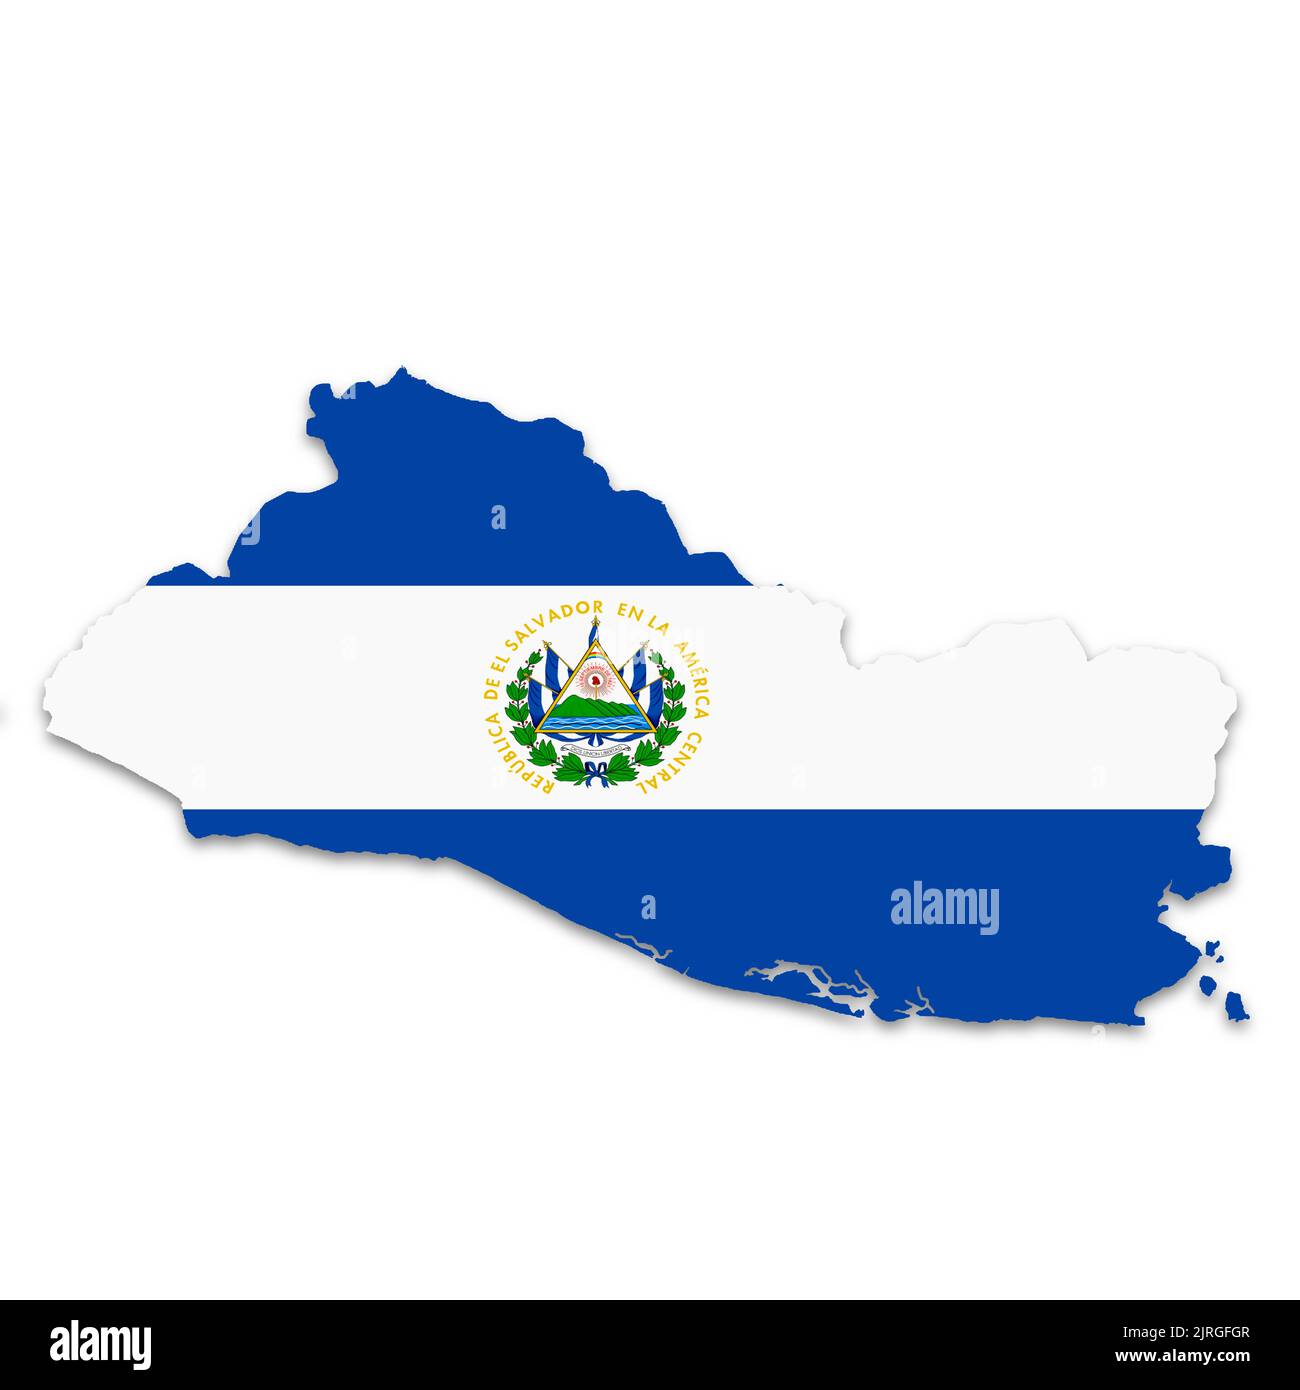 El Salvador map with clipping path to remove shadow 3d illustration Stock Photo